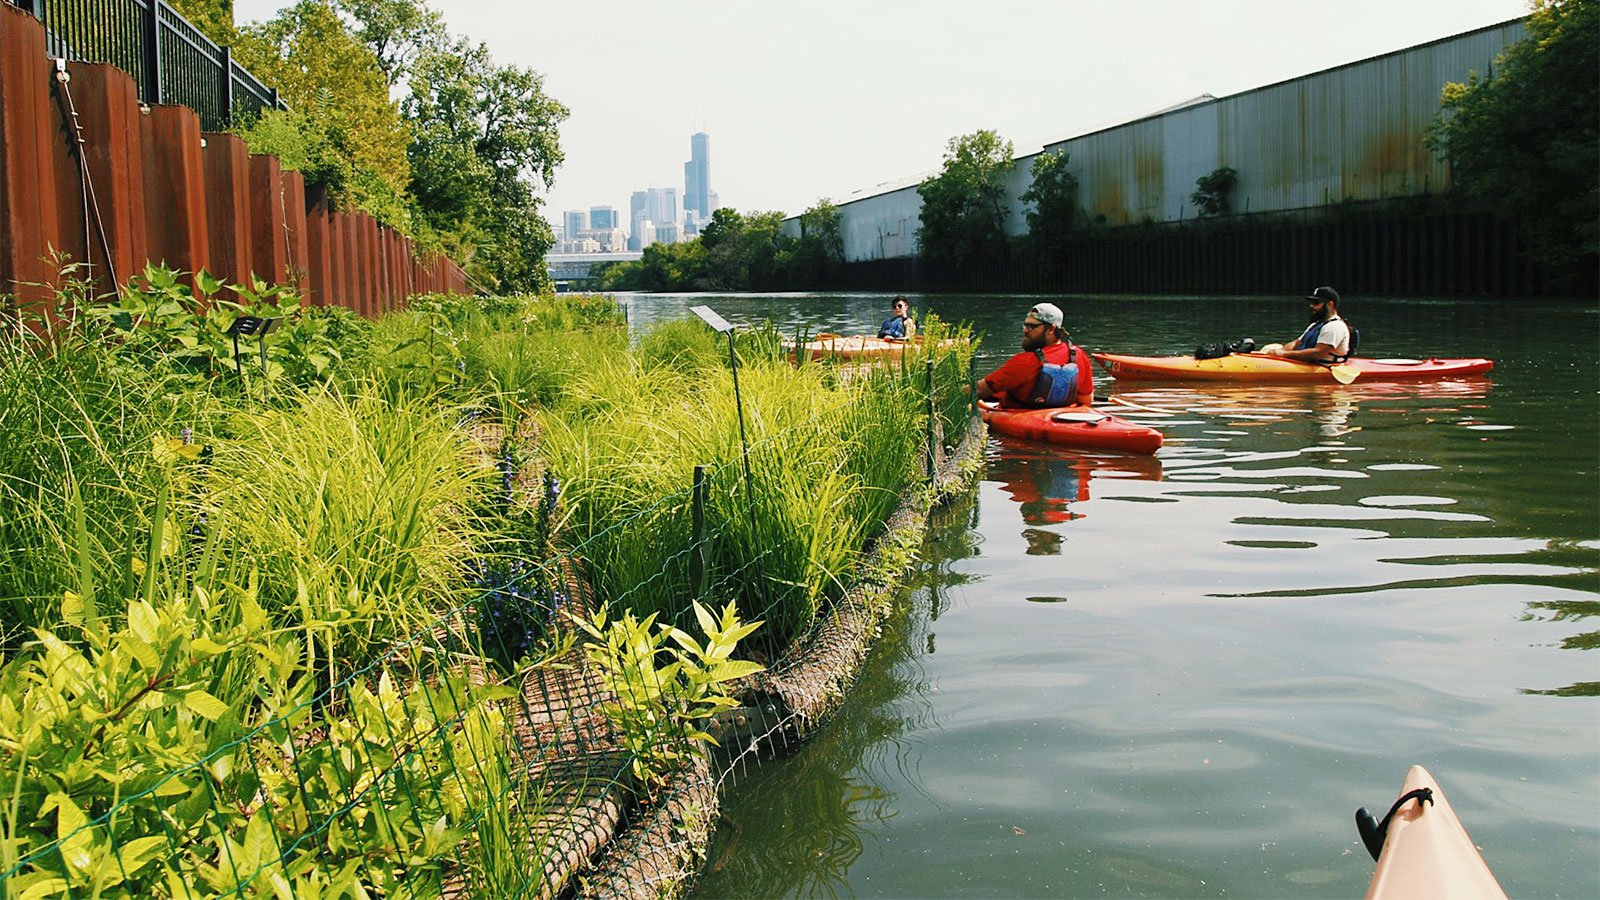 Volunteers and employees of Urban Rivers kayak near the organization’s floating gardens on the North Branch of the Chicago River